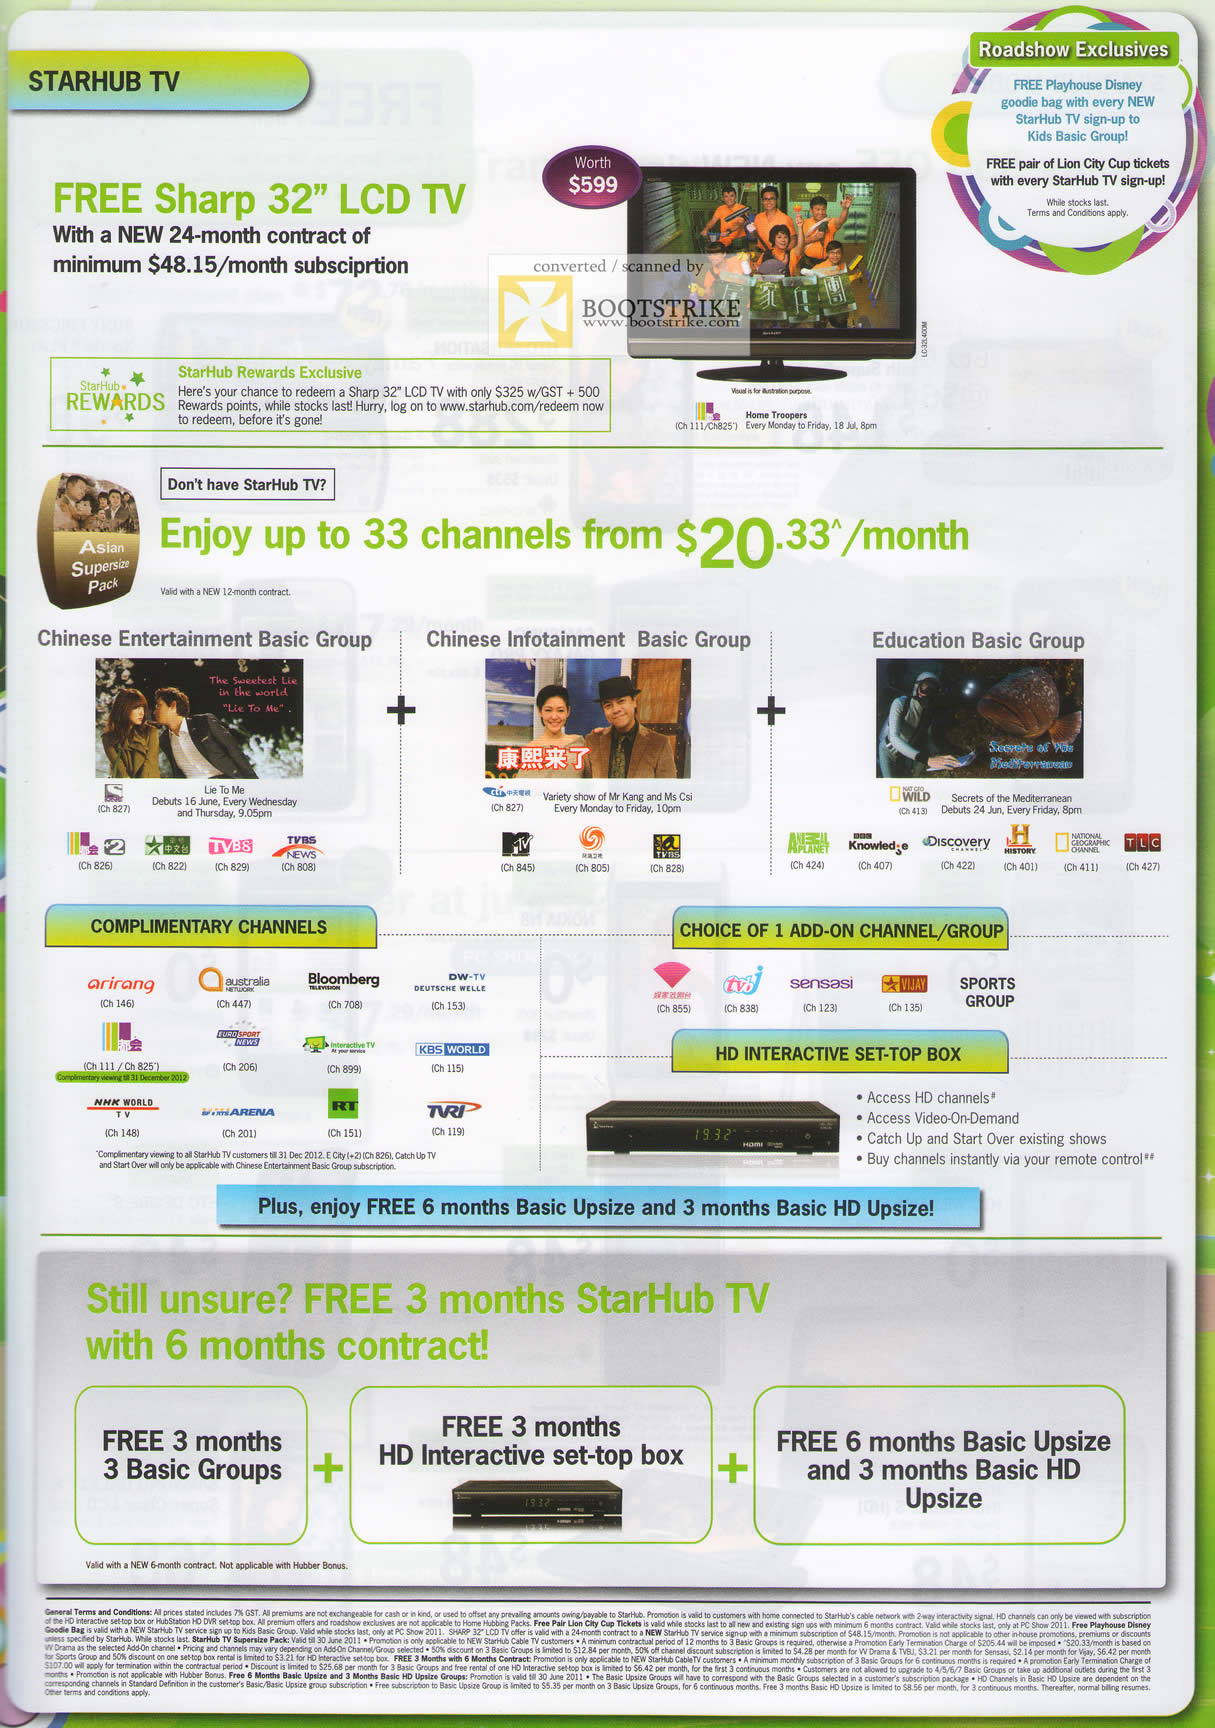 PC Show 2011 price list image brochure of Starhub TV Free Sharp 32 LCD TV Channels Lion City Cup Tickets Playhouse Disney Goodie Bag